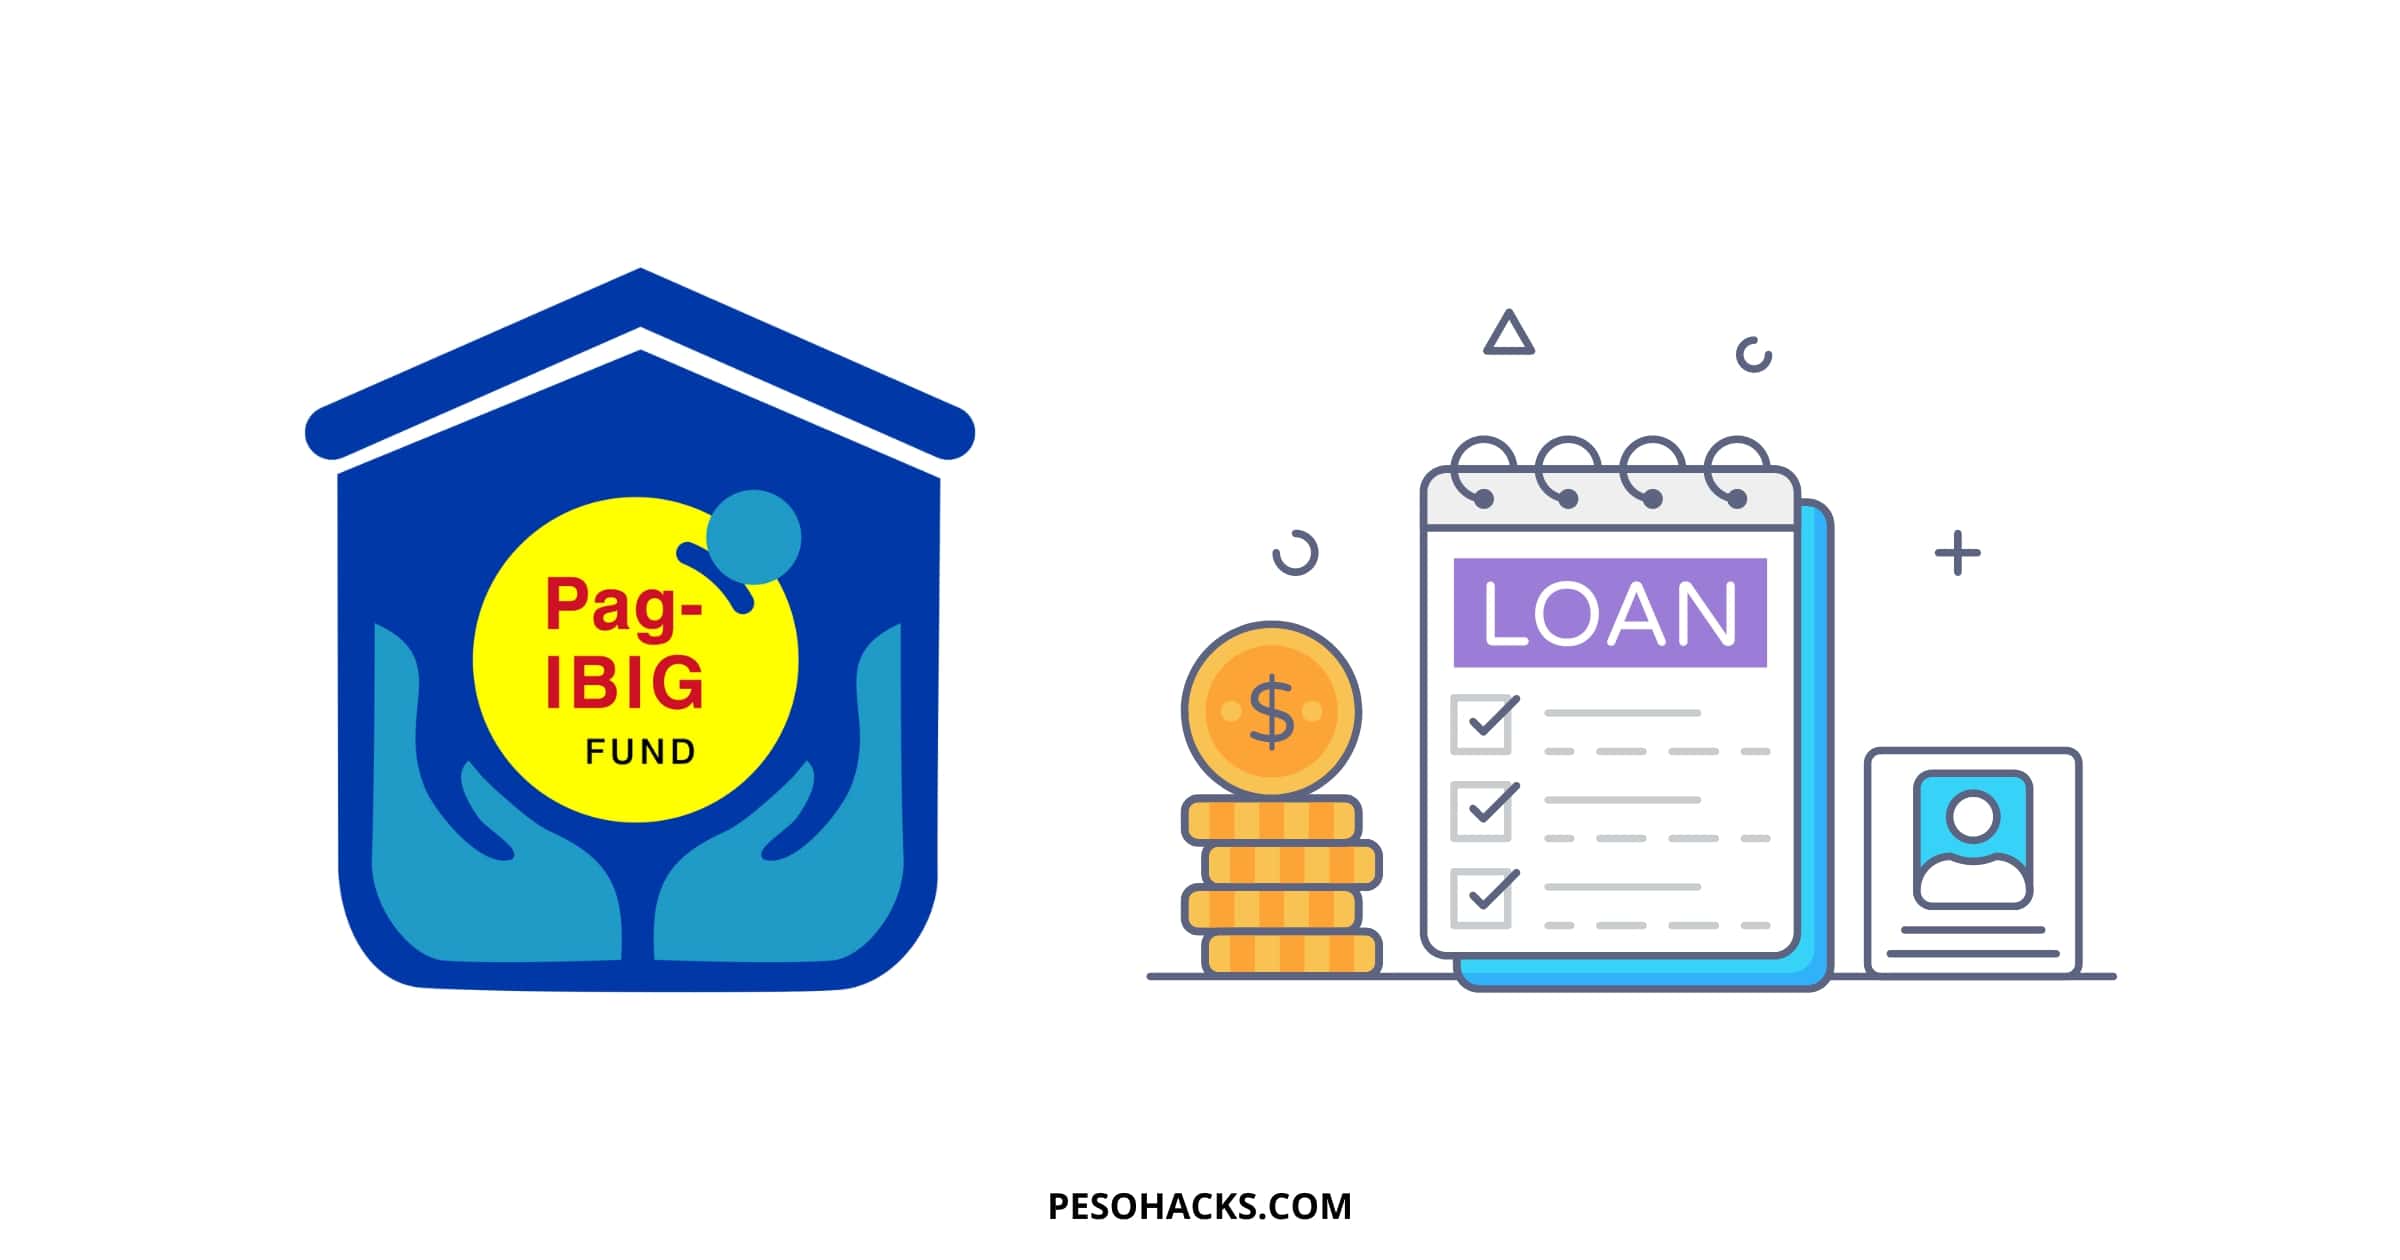 How to apply for PAG IBIG loan online